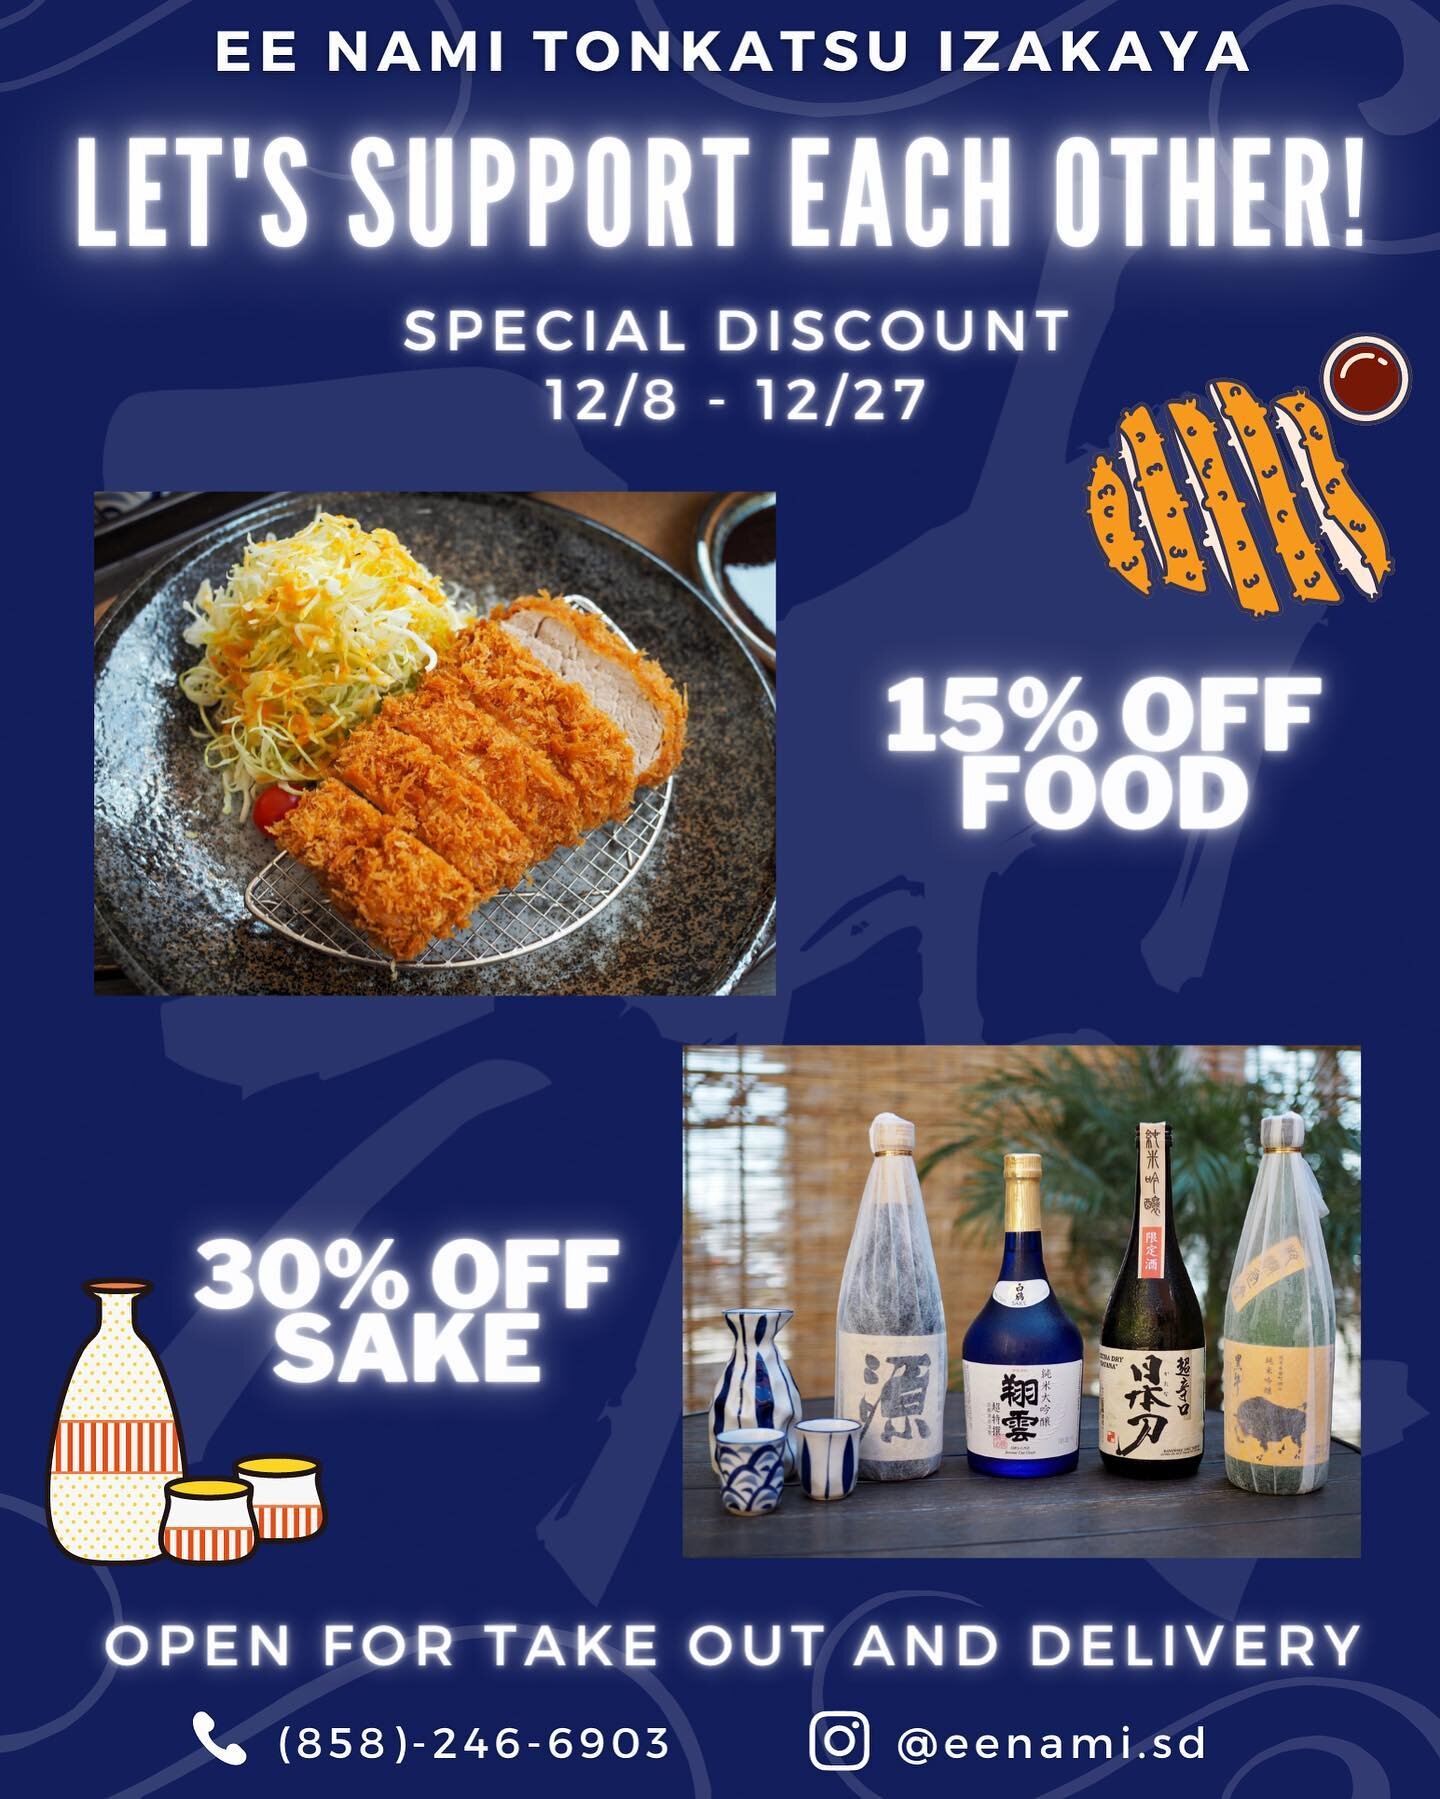 LET&rsquo;S SUPPORT EACH OTHER!  VOL. 2 

✨15% off food, 30% off sake bottles🍶

Starting Tuesday 12/8, EE NAMI will be modifying its operations to follow the updated county restrictions. Although dine-in won&rsquo;t be available, we will continue to